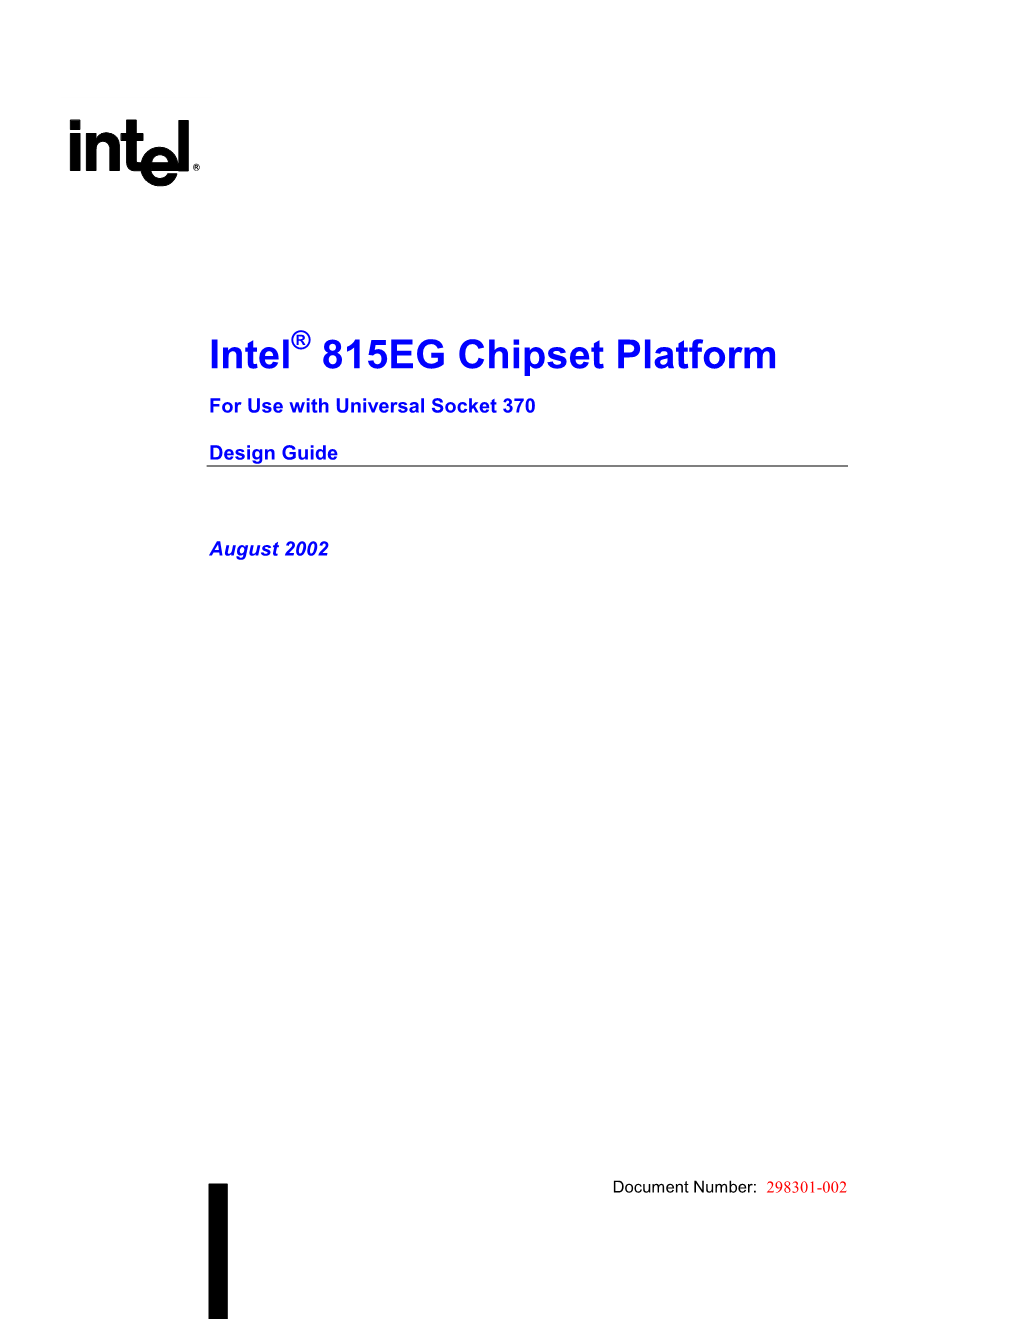 Intel 815EG Chipset Platform Supports the Following Processors: • Intel® Pentium® III Processor Based on 0.18 Micron Technology (CPUID = 068Xh)